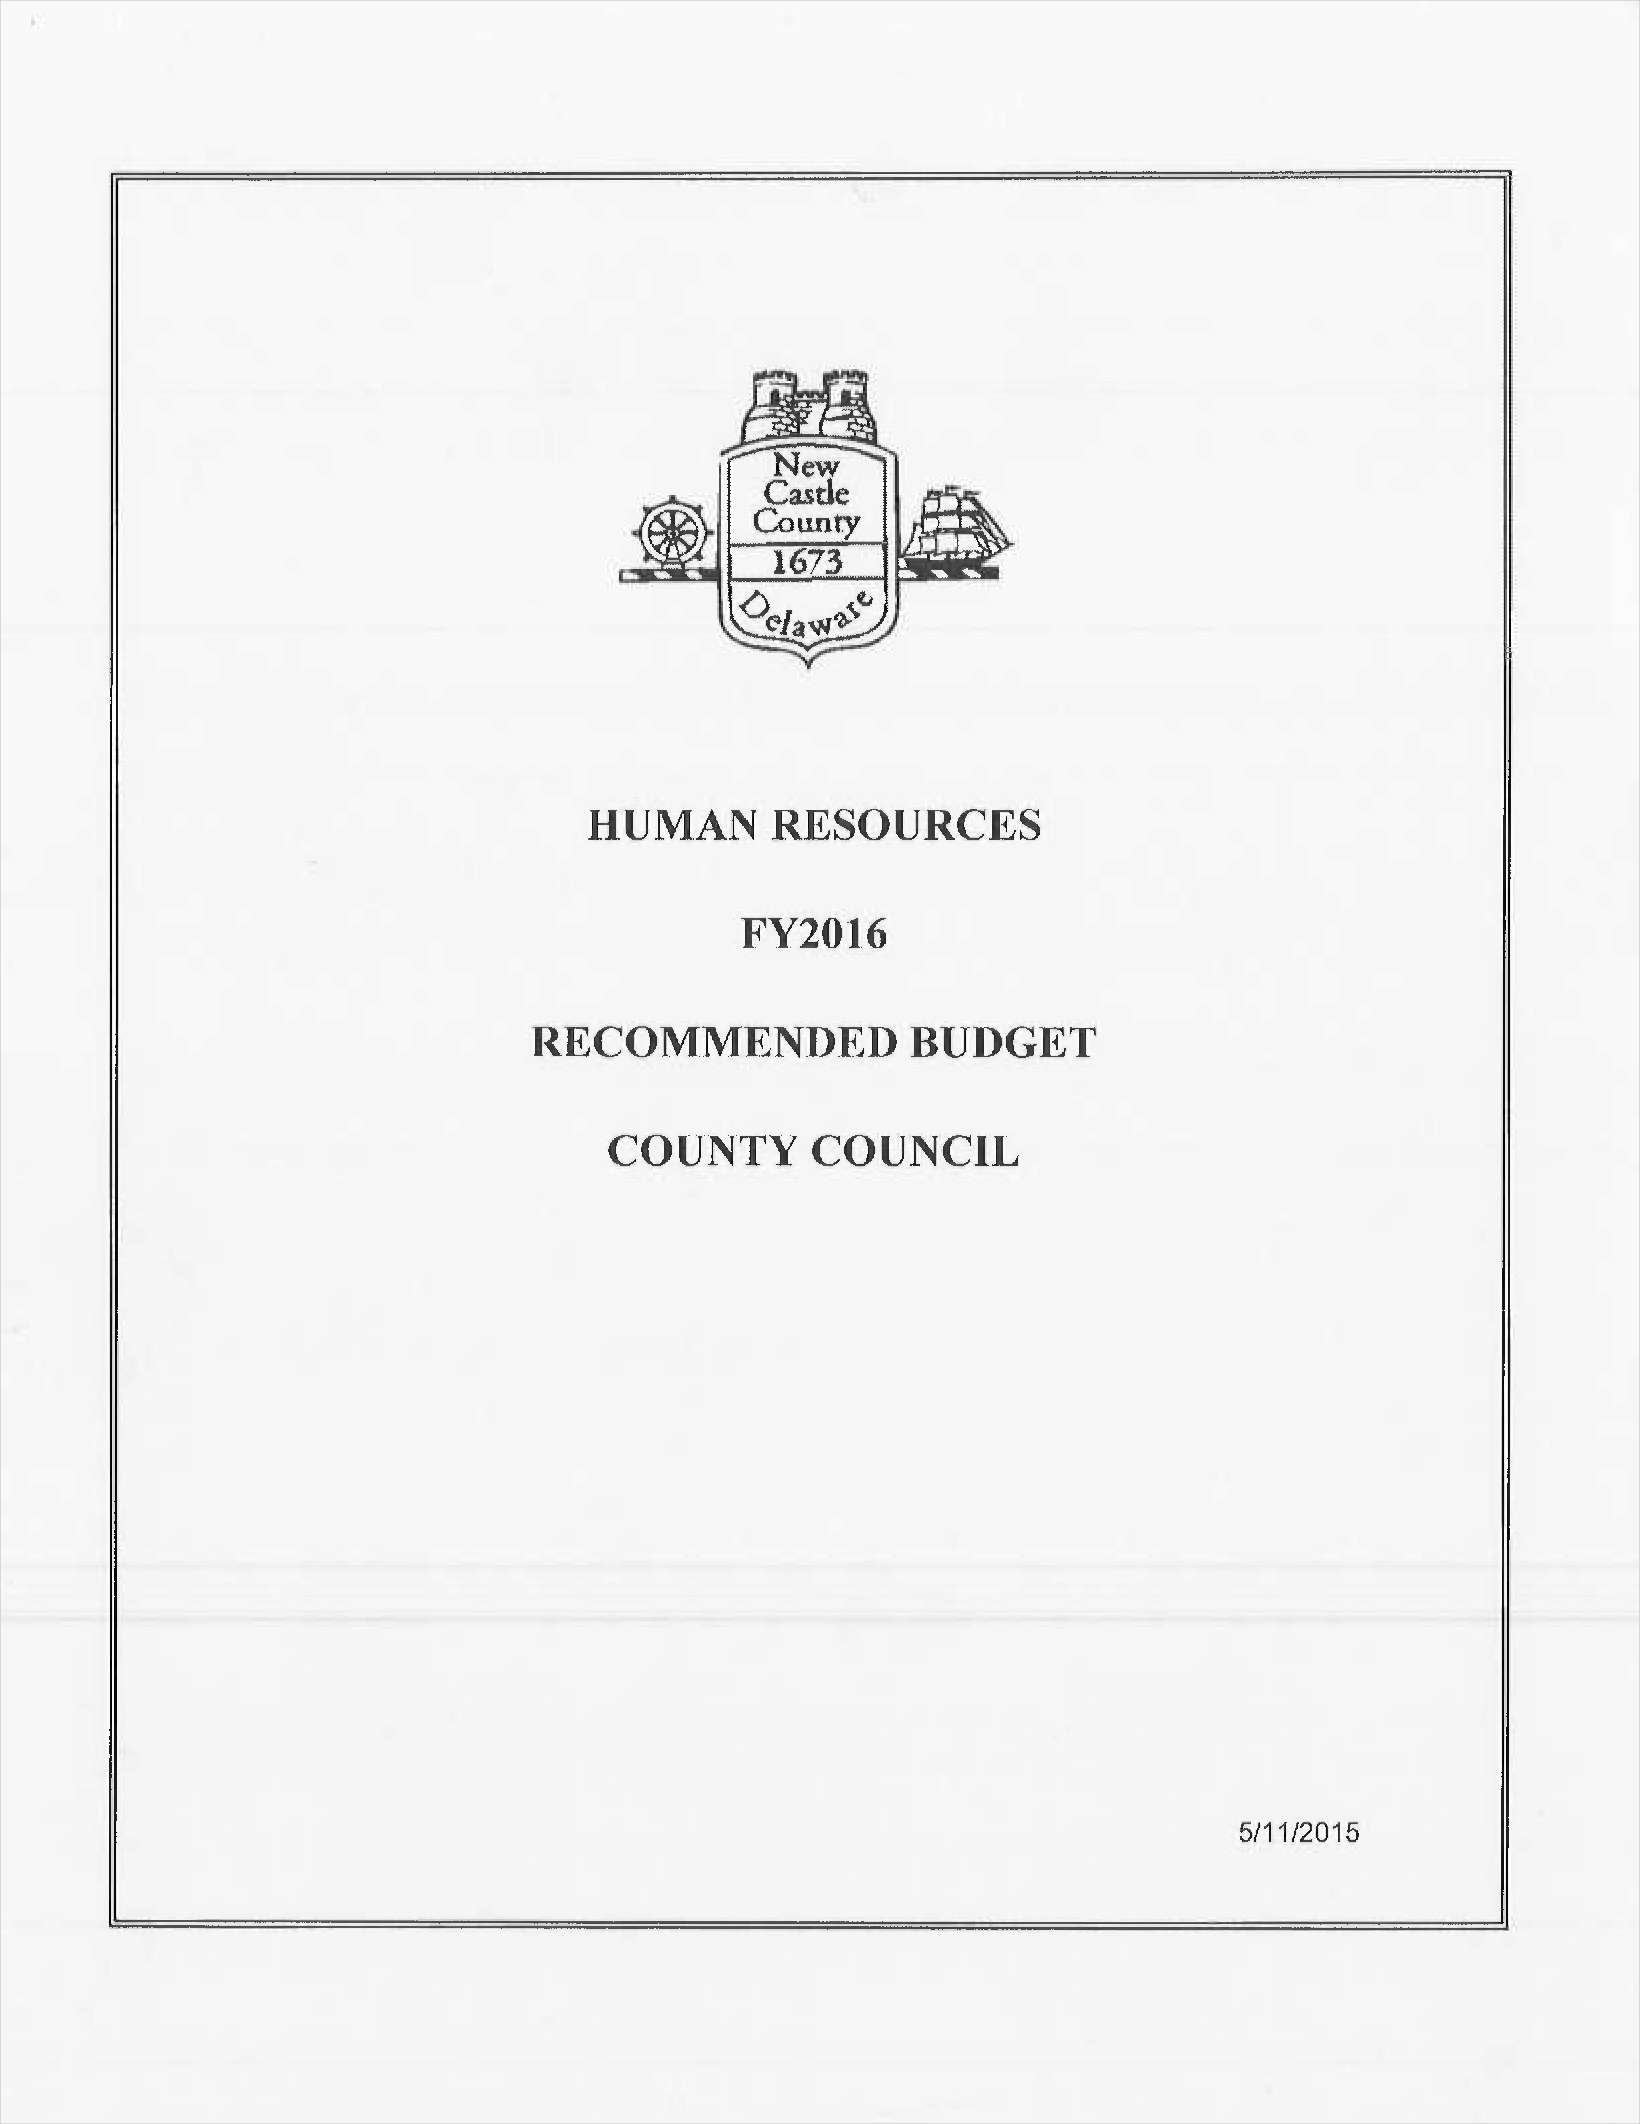 Human Resources Recommended Budget Example